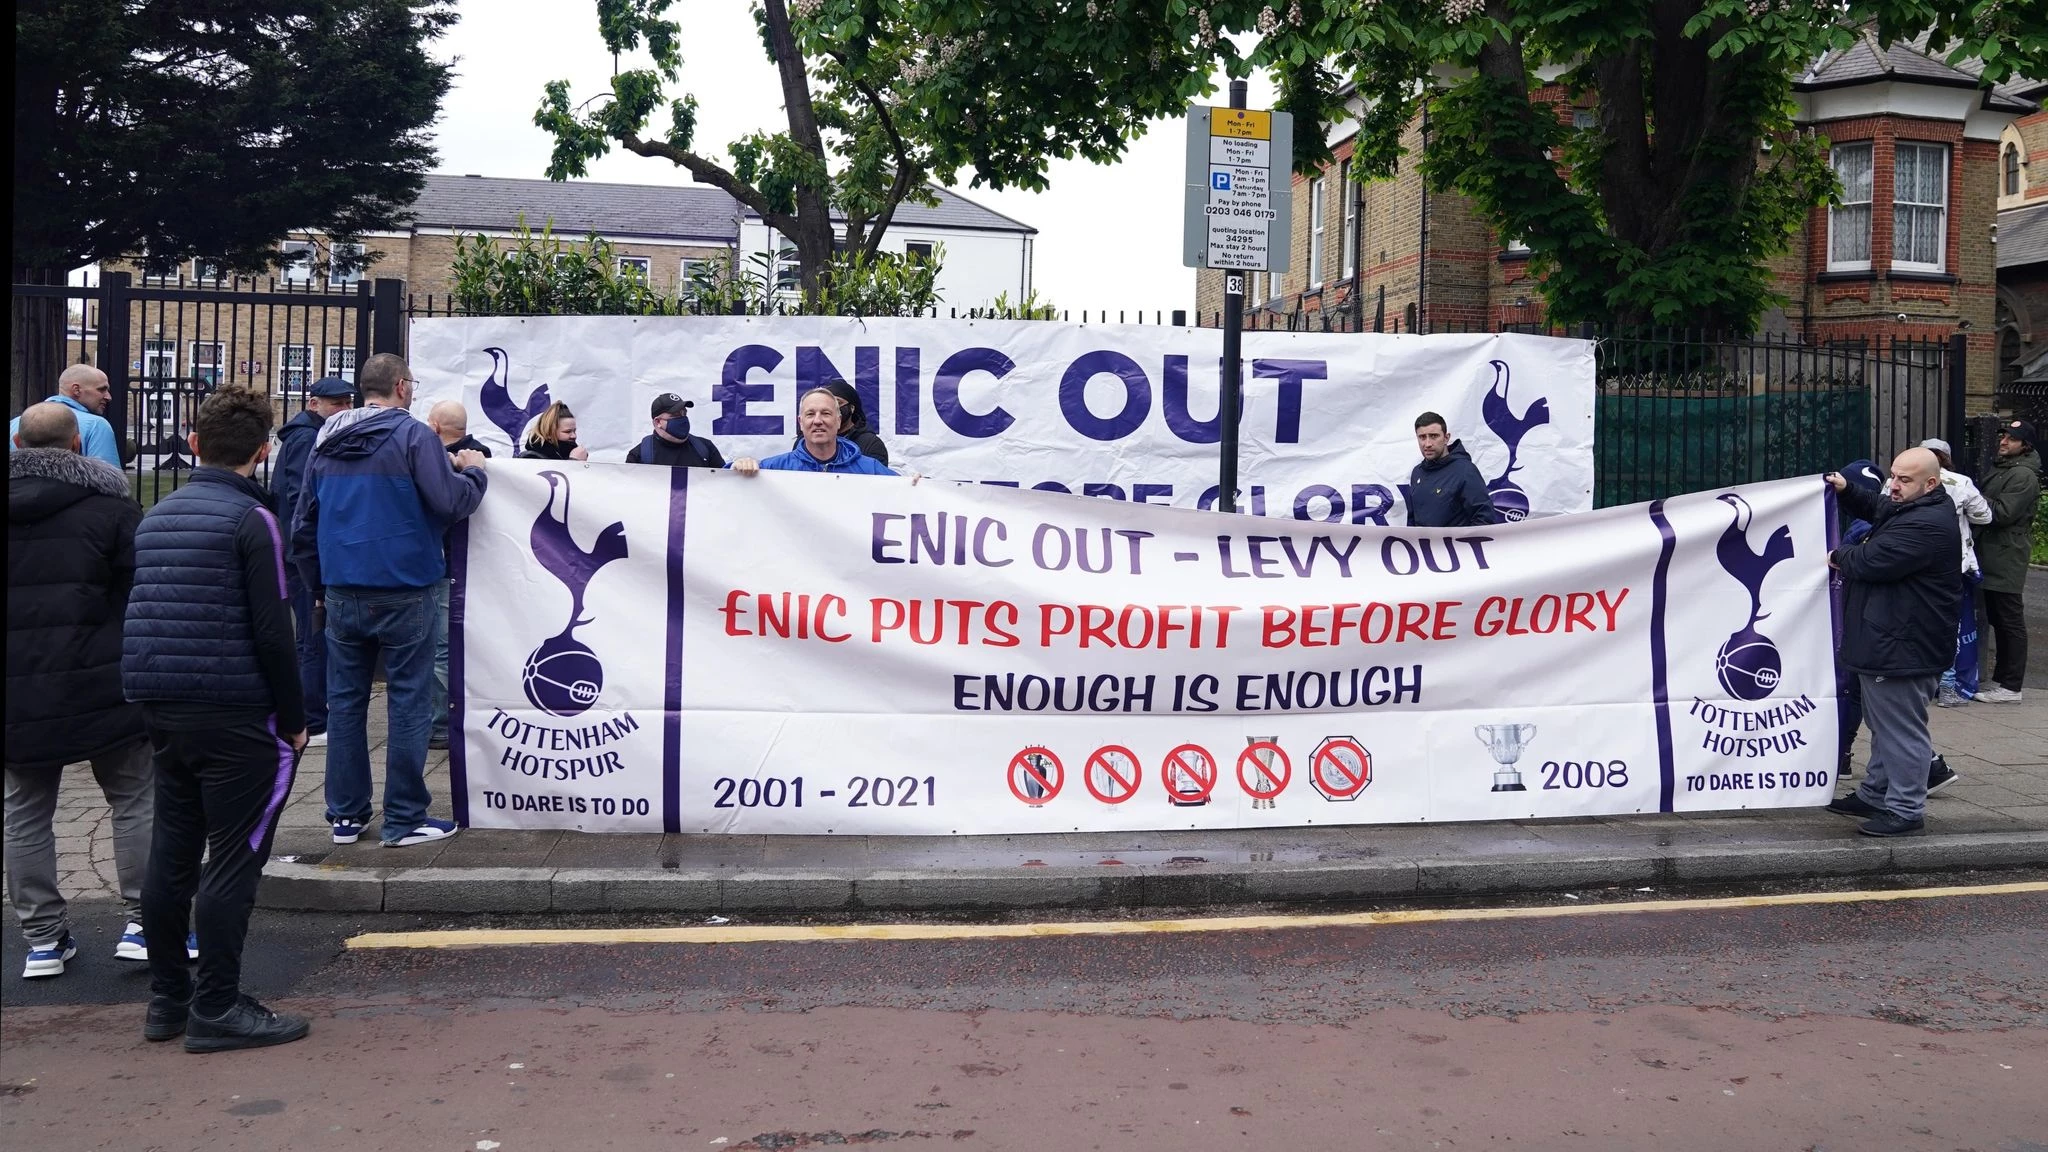 Tottenham supporters hold protest against club owners as Super League fallout continues